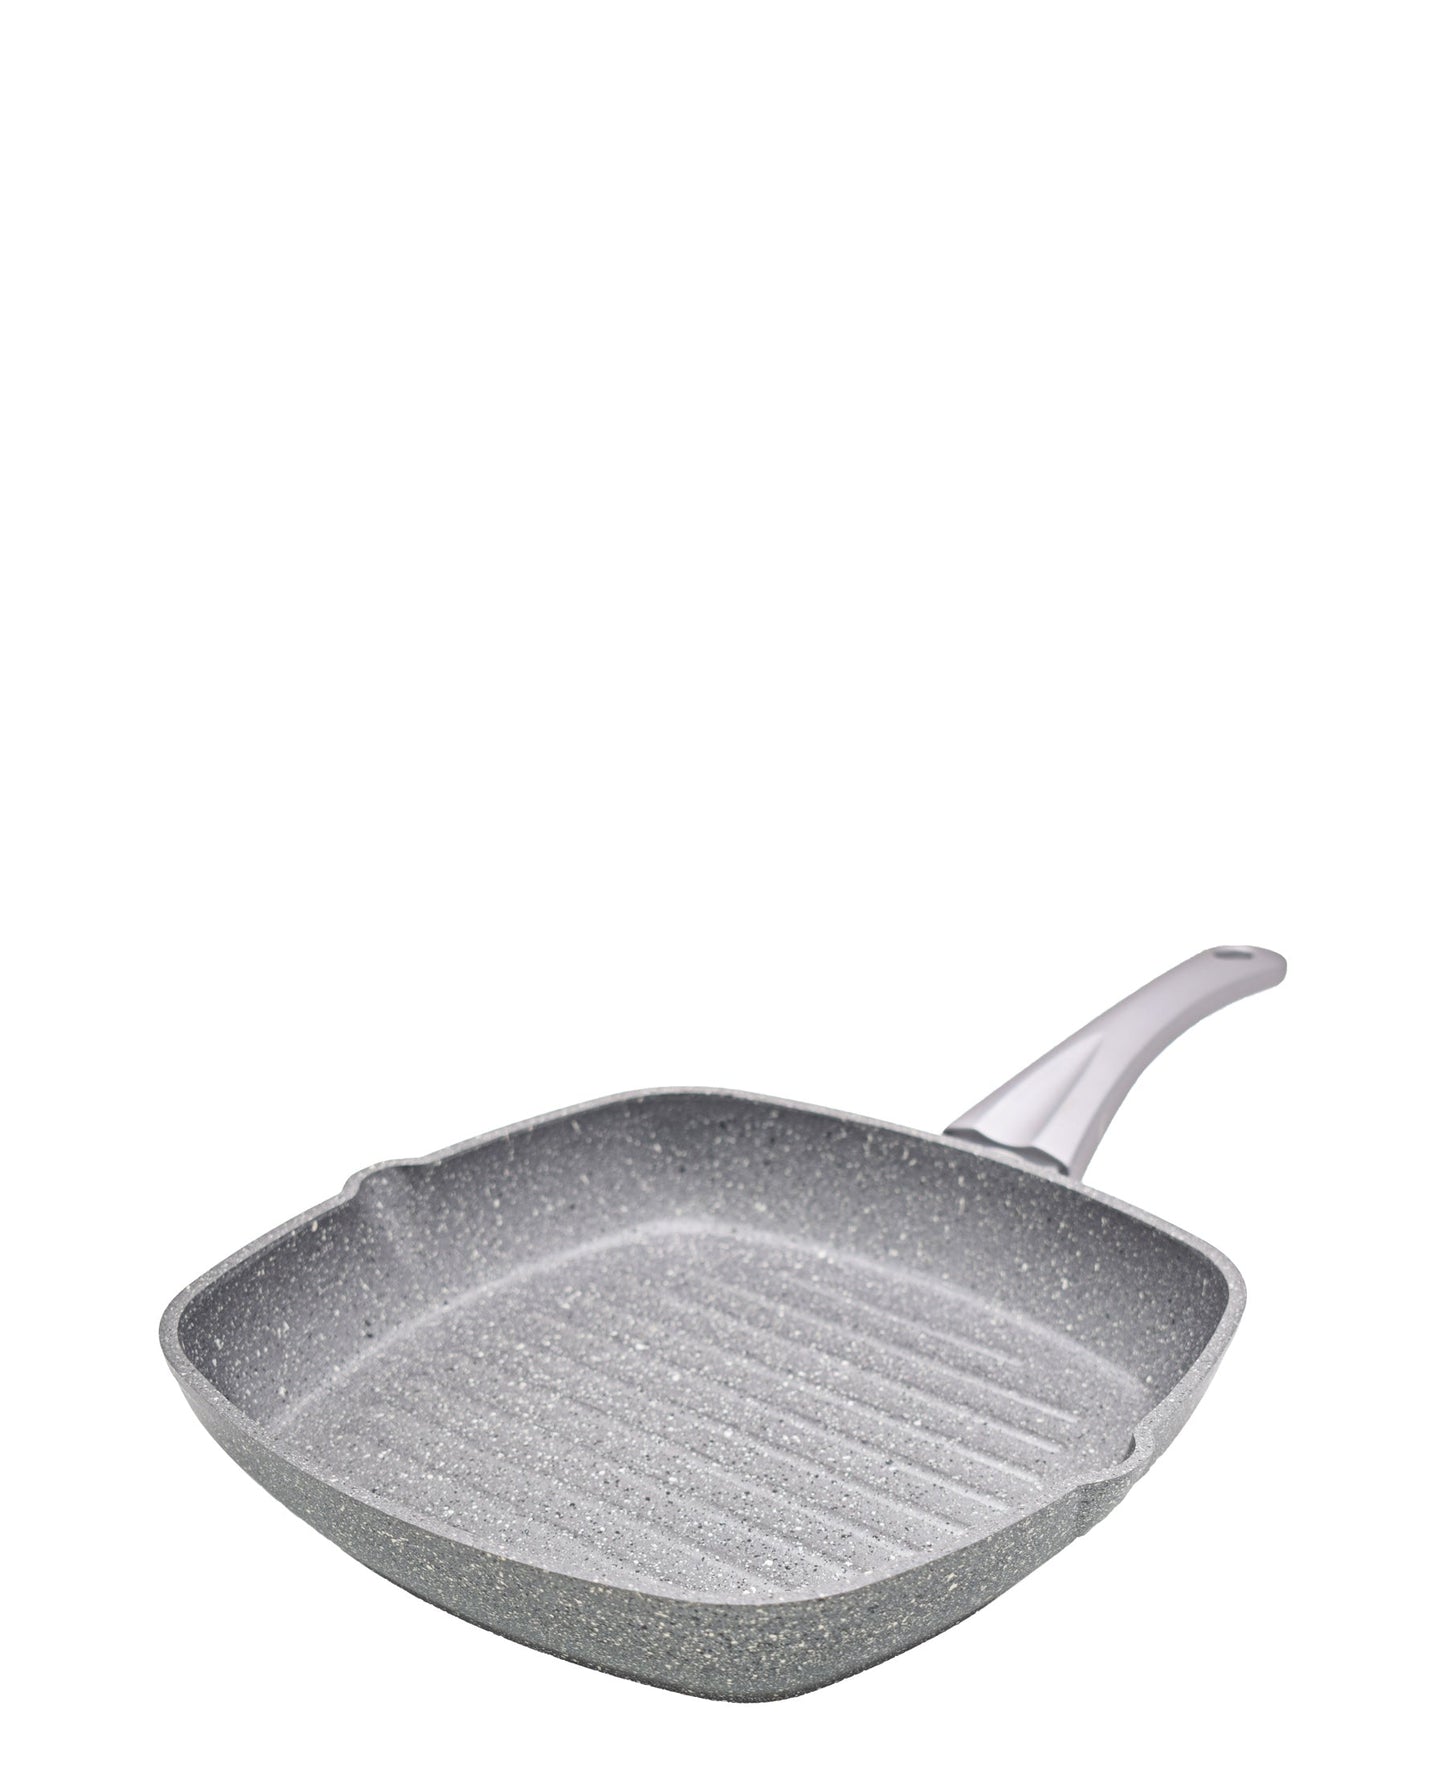 OMS Grill Frying Pan 28cm - Grey